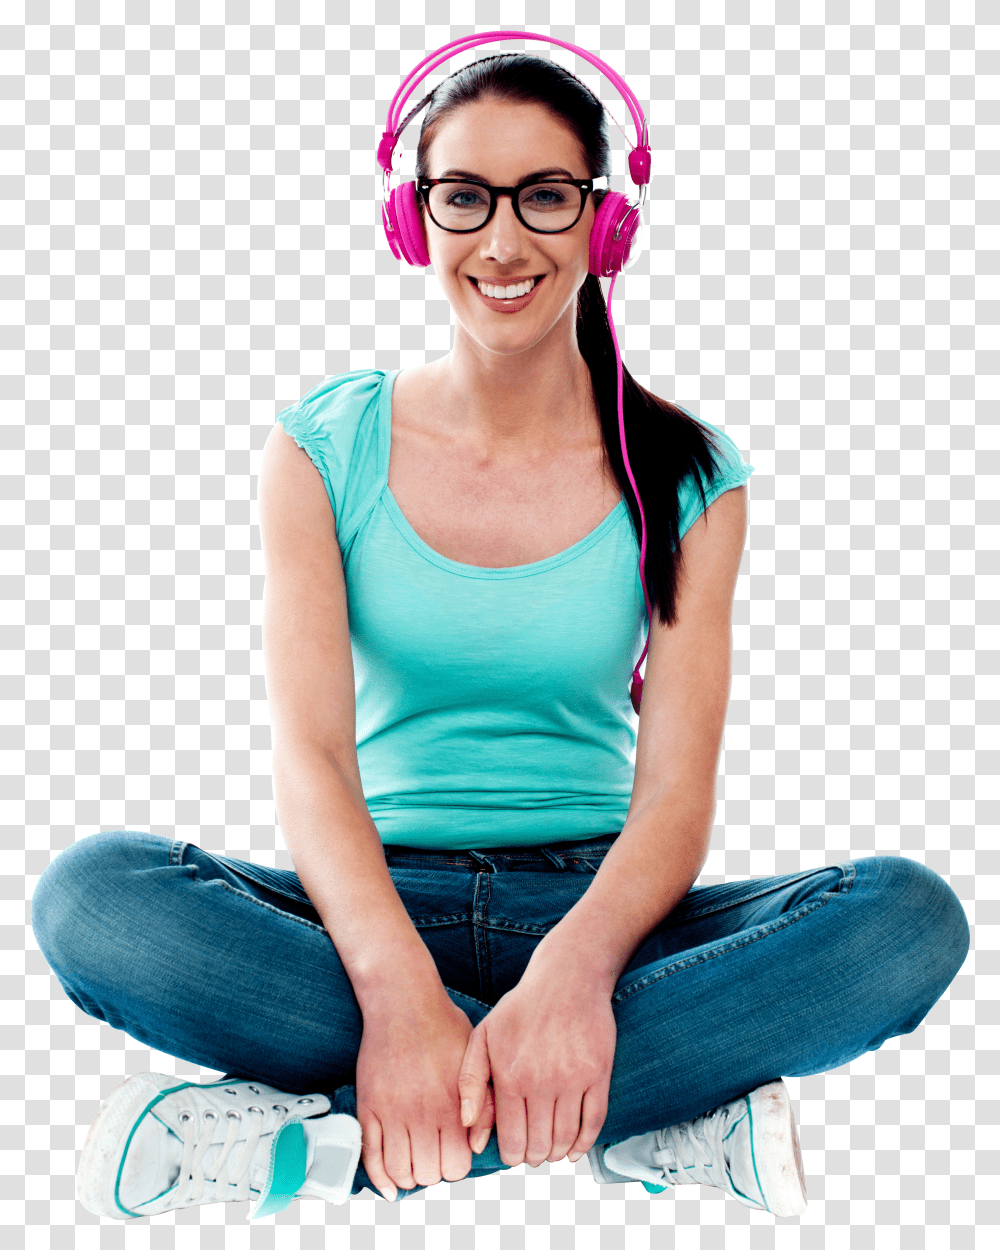 Listening Music Image For Free Woman Listening Music Transparent Png